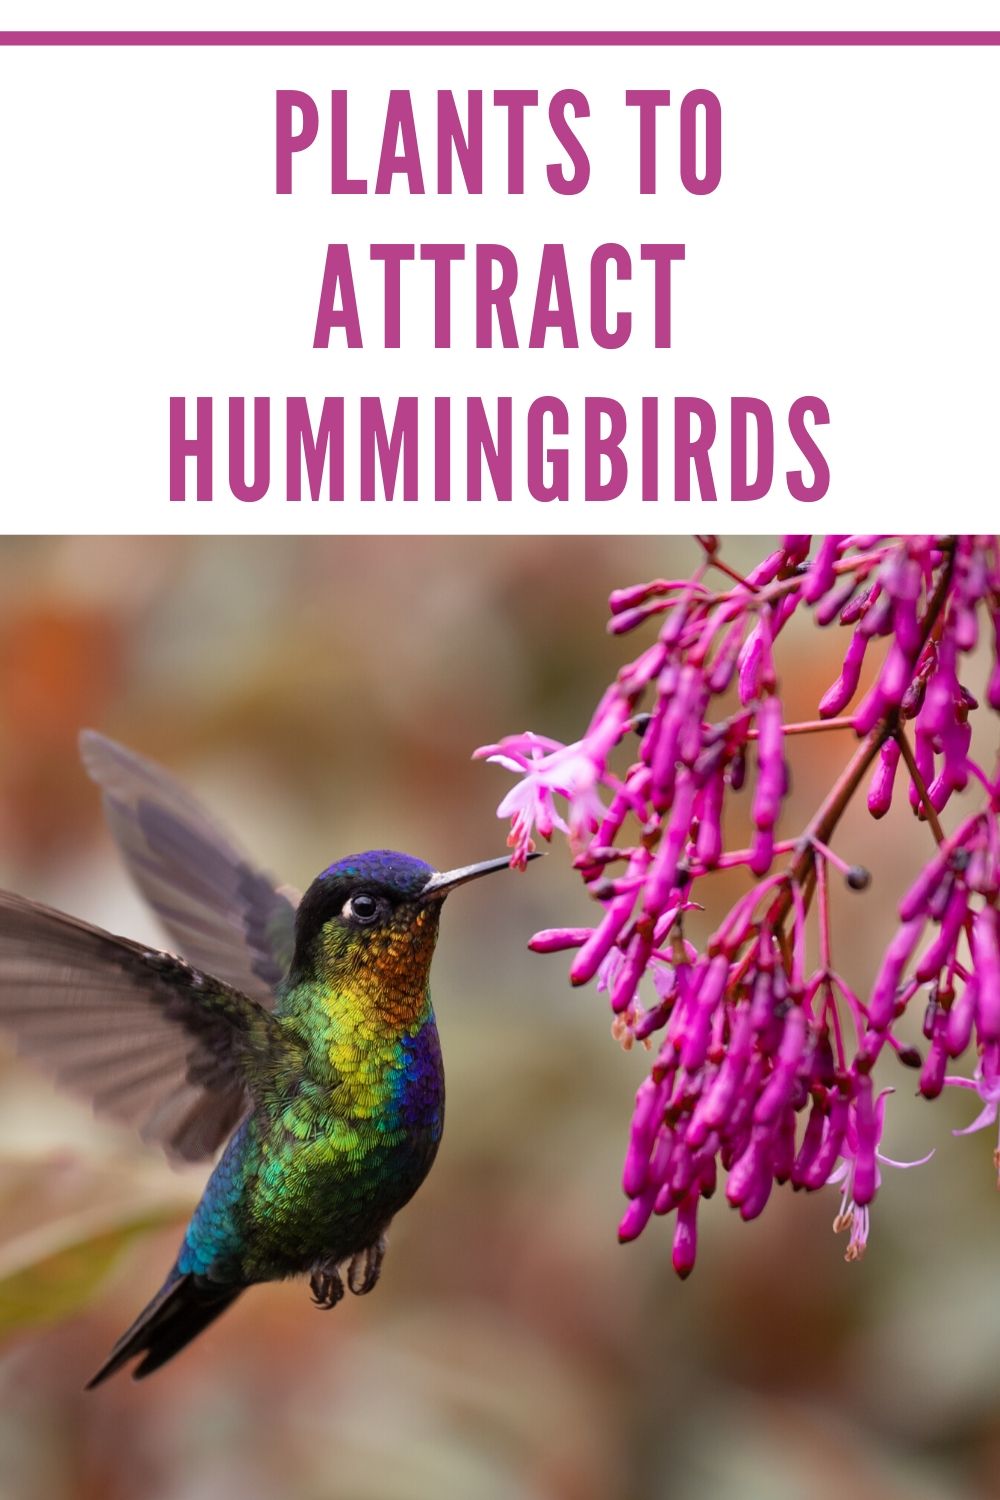 Plants To Attract Hummingbirds Outnumbered 3 To 1,What Is Corian Countertops